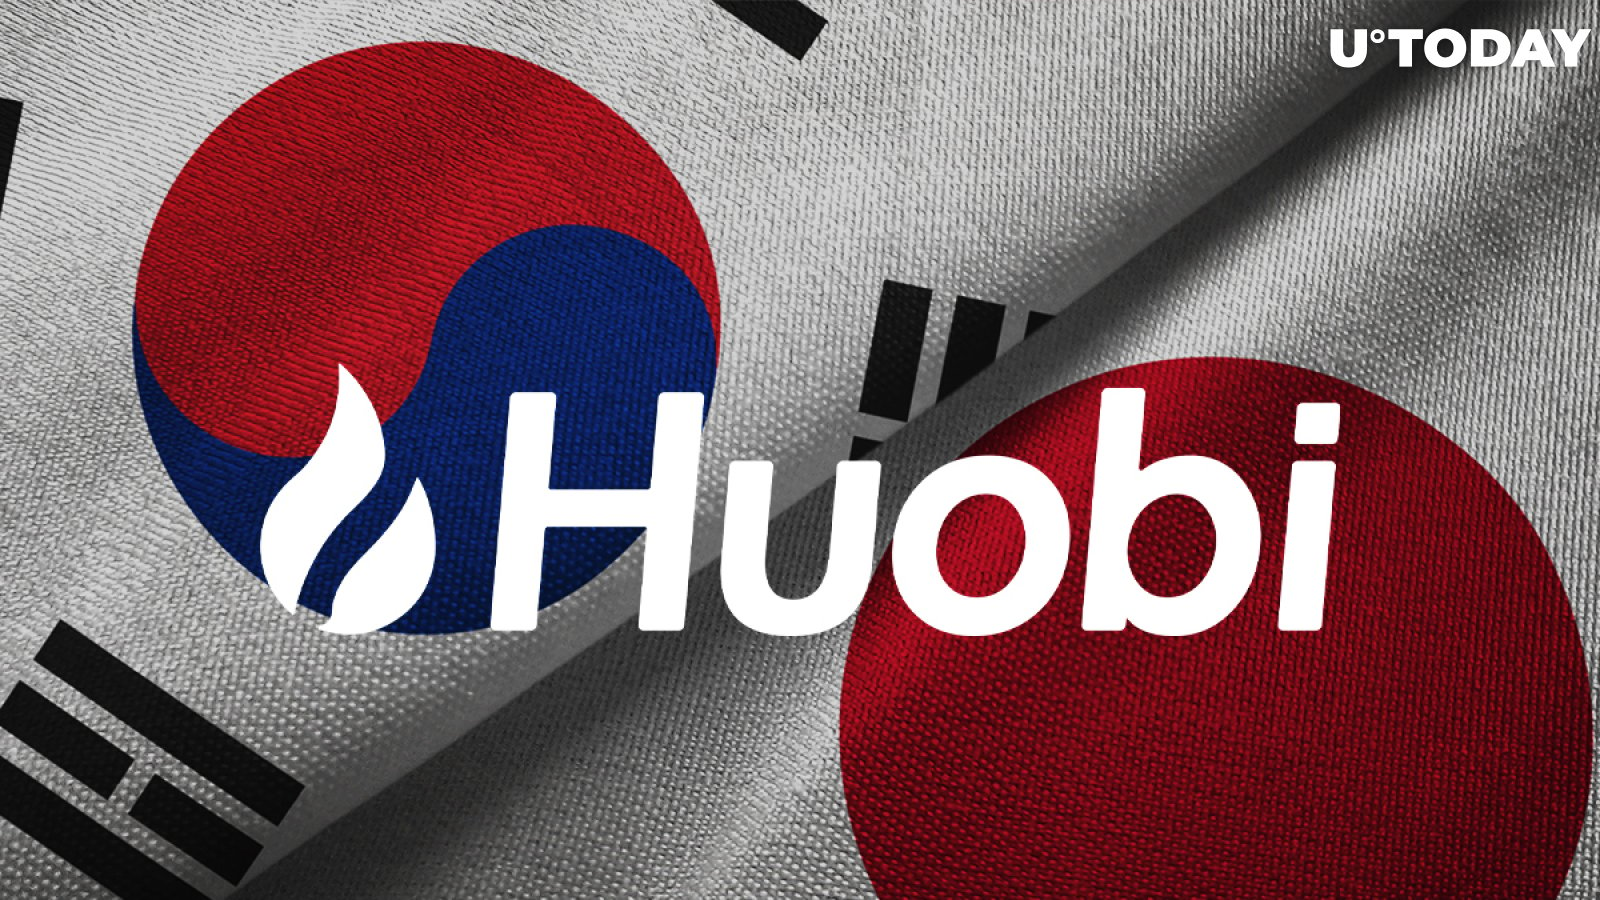 Houbi Giant Intends to Acquire Biggest Exchanges in Japan and South Korea: Insider Colin Wu